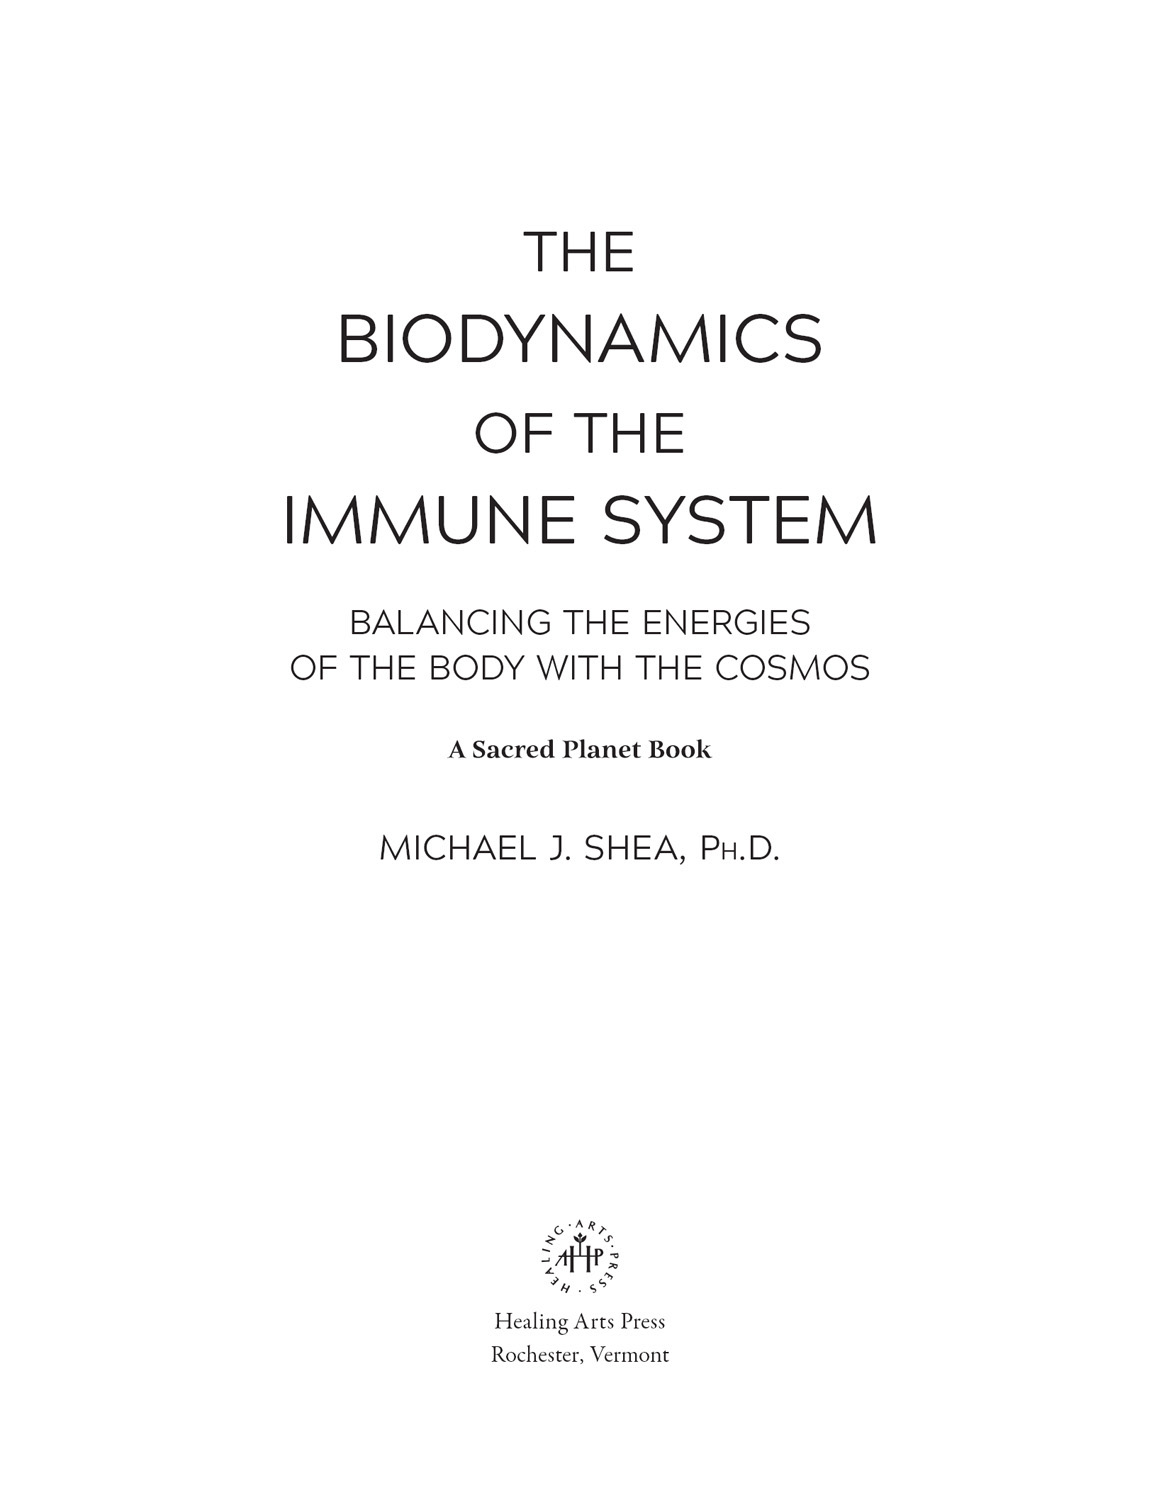 The Biodynamics of the Immune System Balancing the Energies of the Body with the Cosmos - image 2